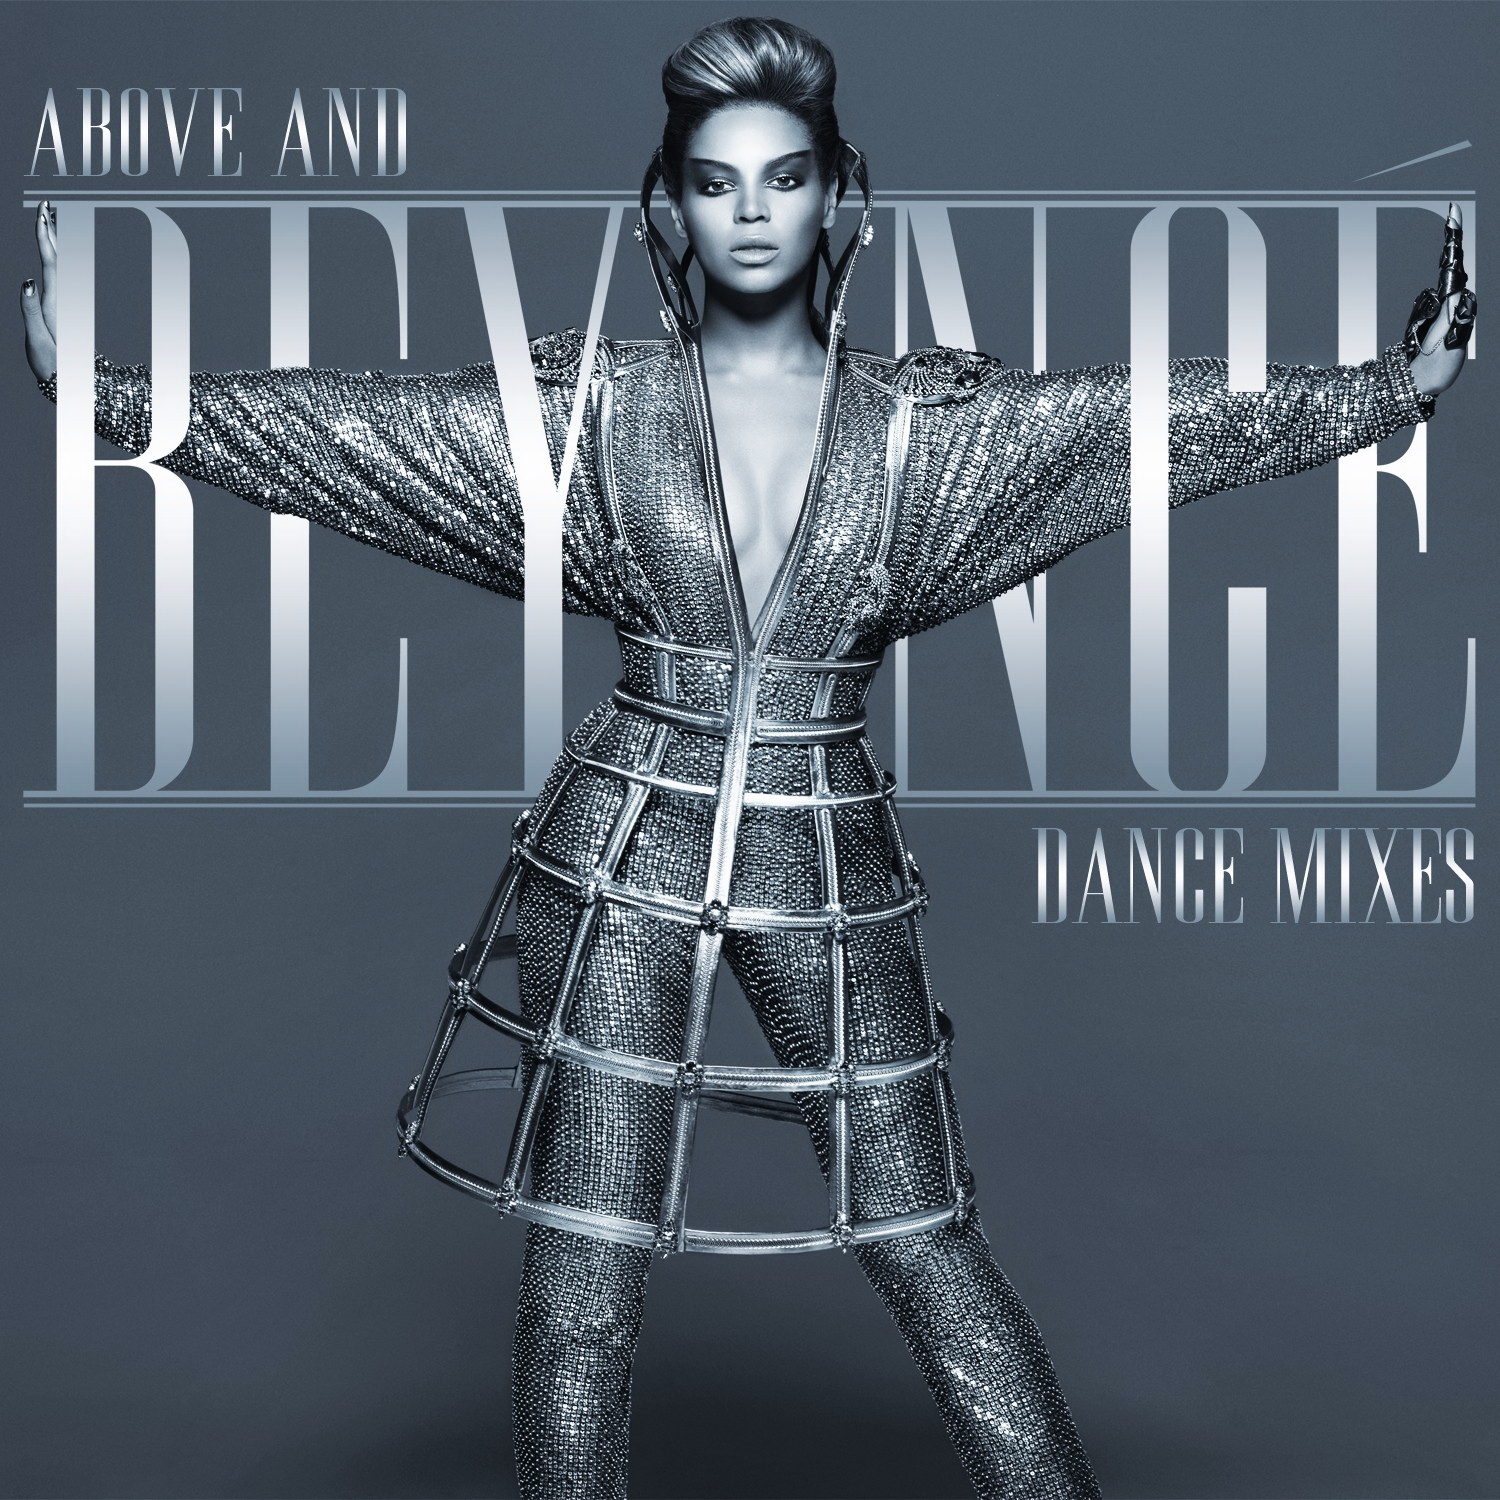 2009 - Above And Beyonce Dance Mixes - Cover1.jpg